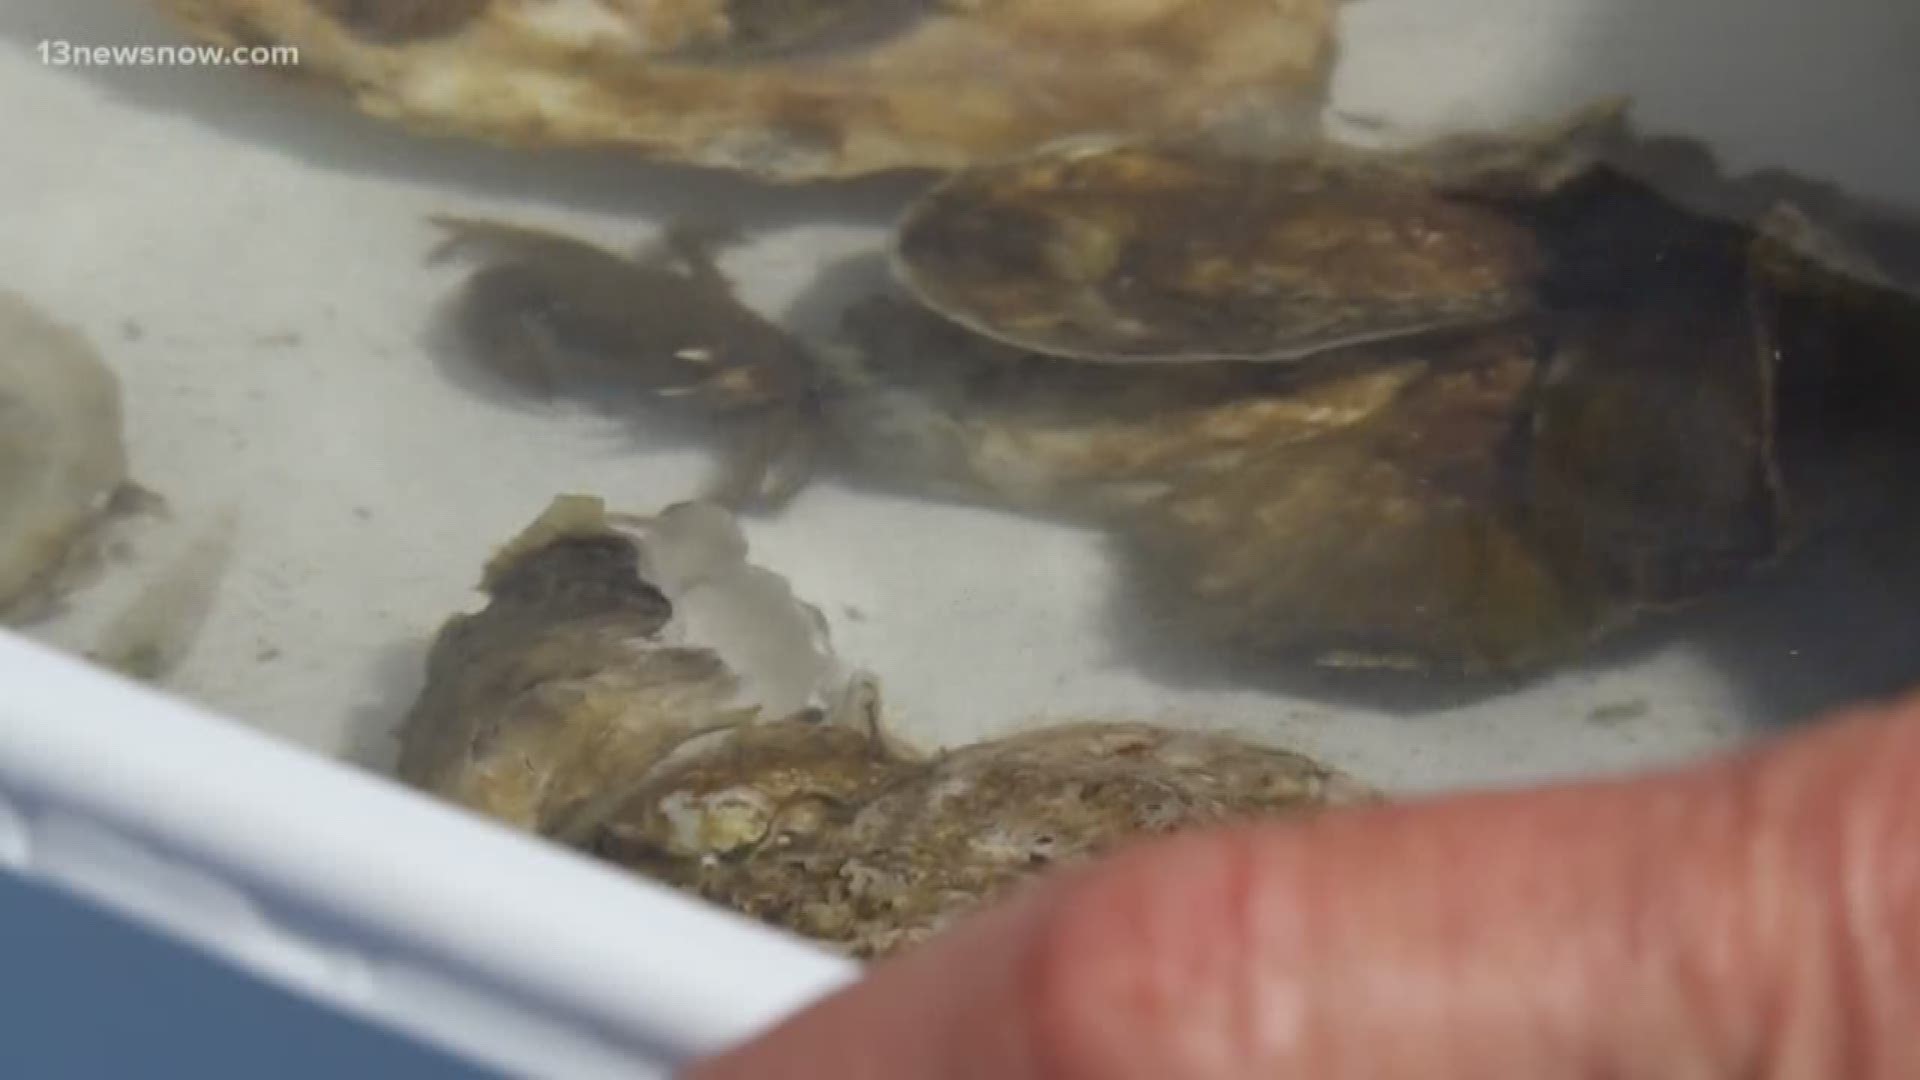 The Virginia Aquarium in Virginia Beach is working on keeping our water as clean as possible through oyster reefs. It's a natural filtration method.